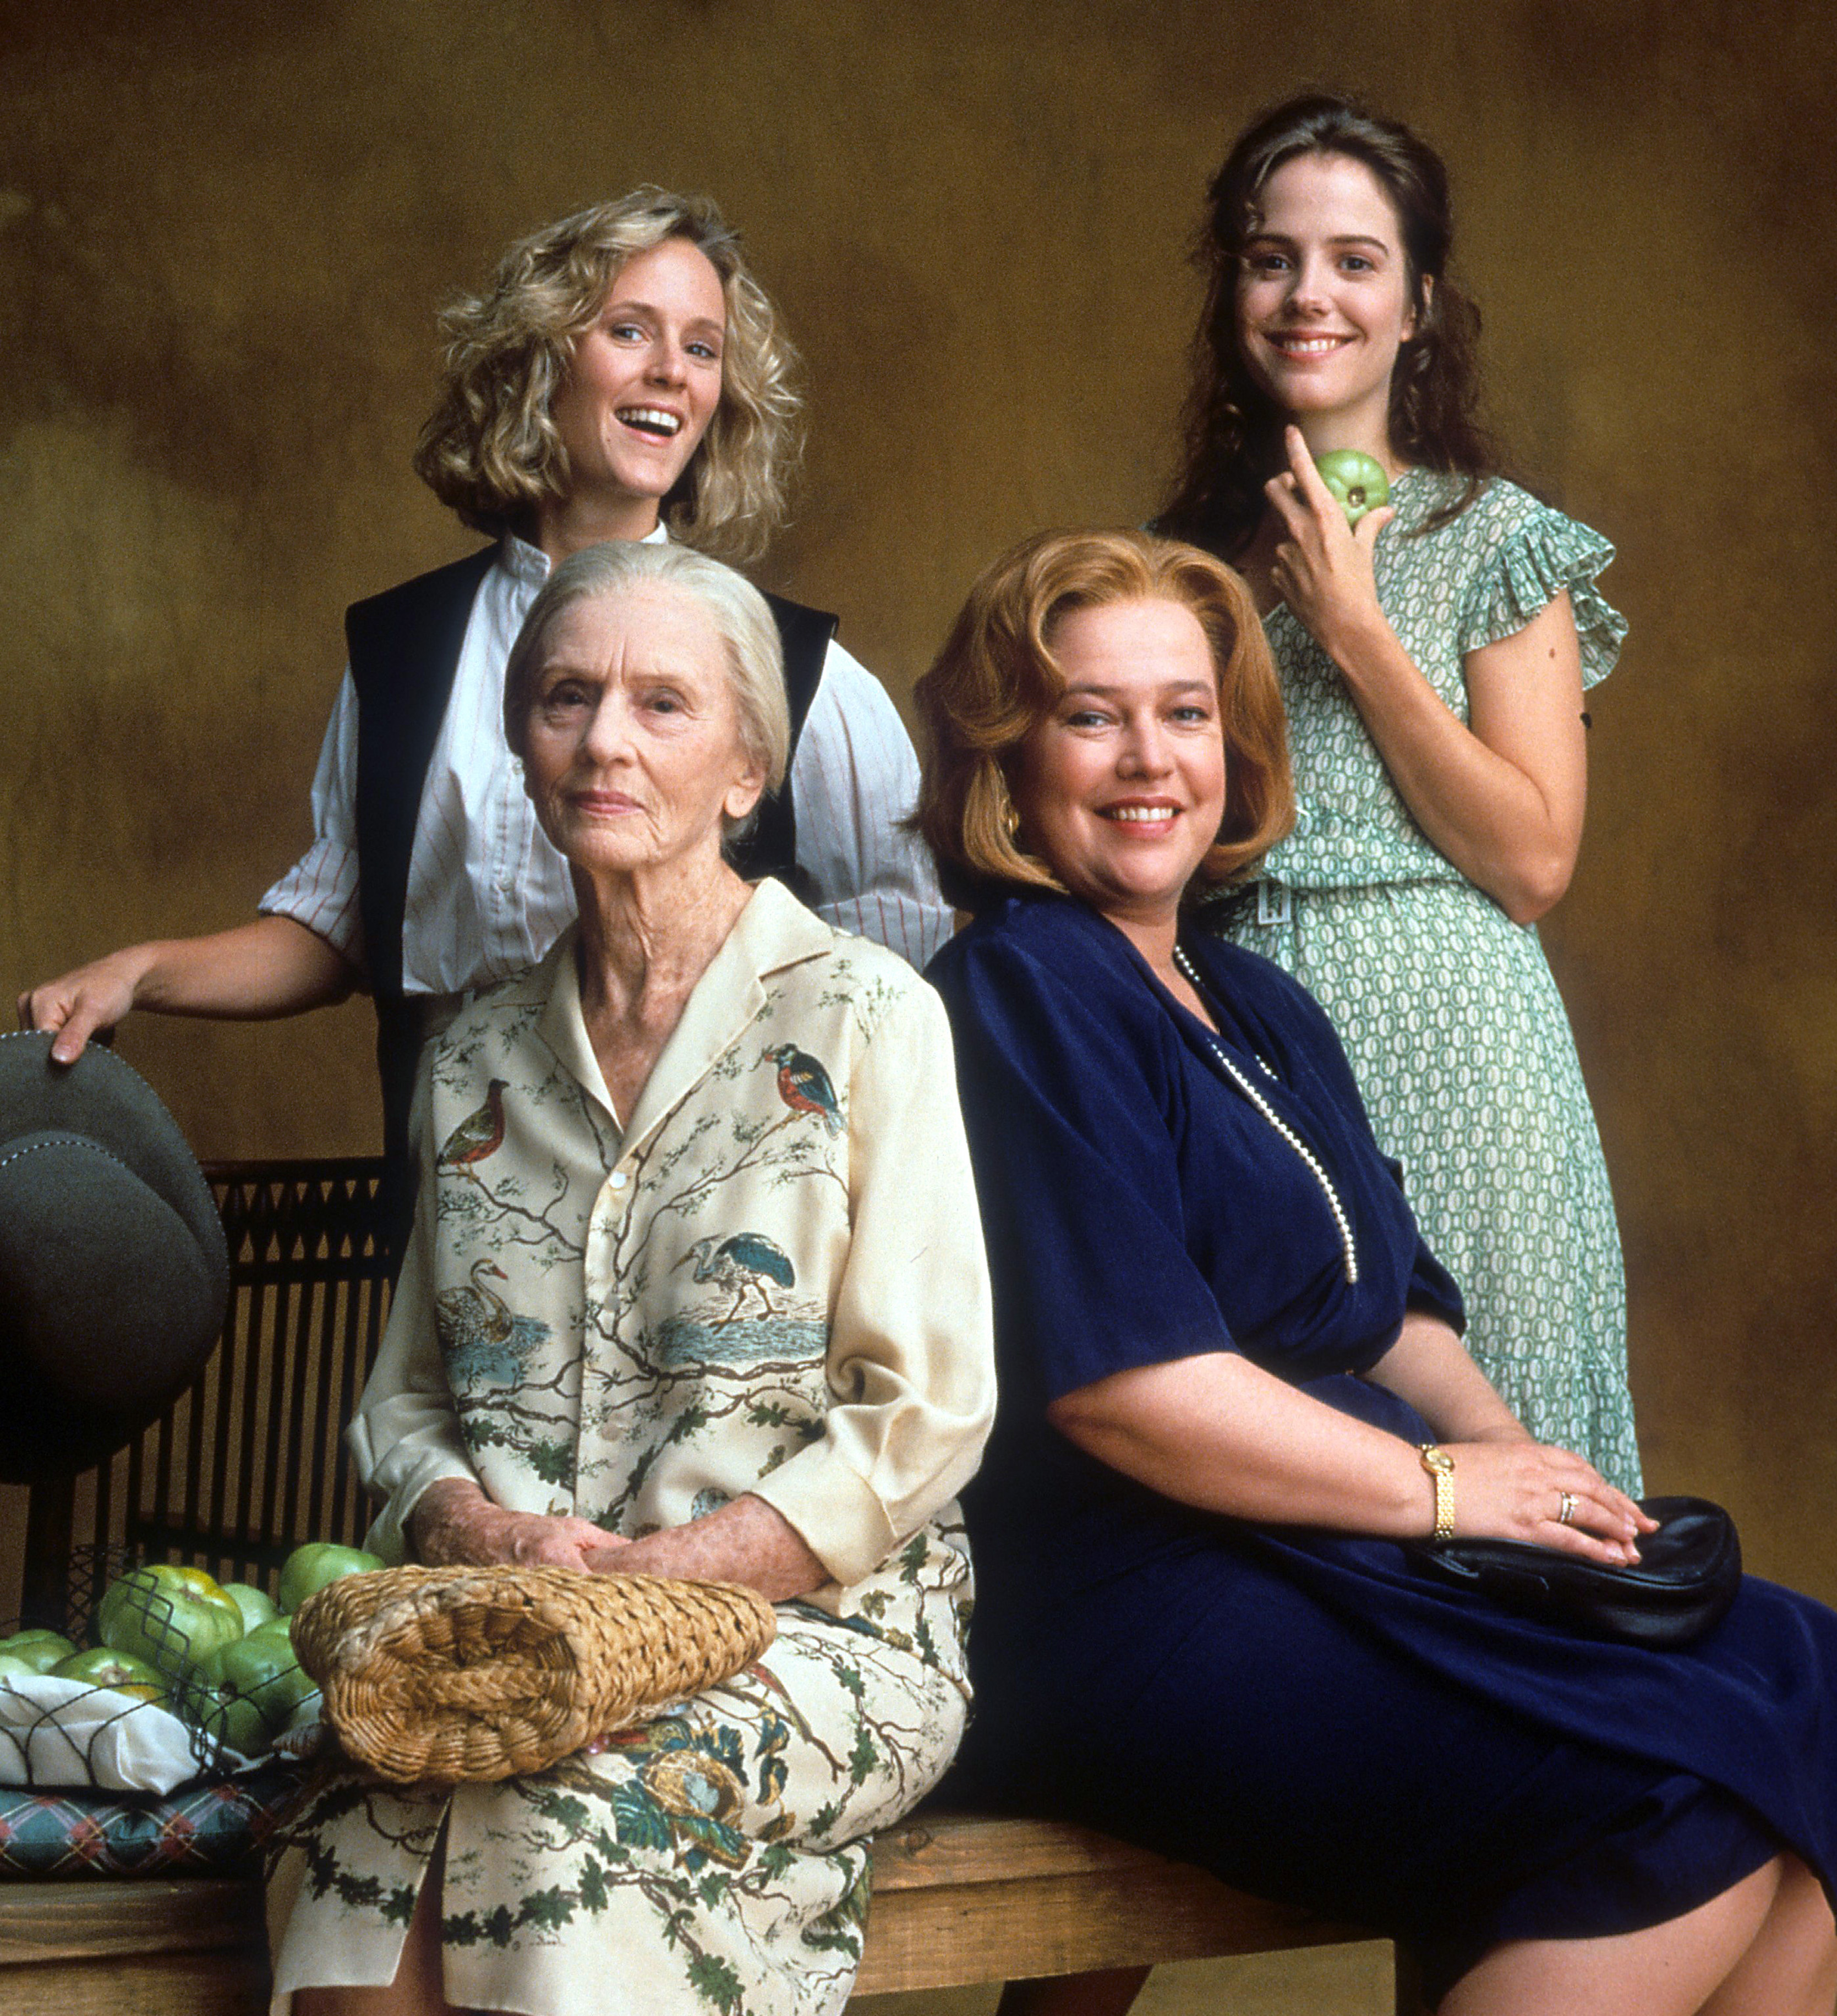 Mary Stuart Masterson, Jessica Tandy, Kathy Bates, and Mary-Louise Parker in a publicity portrait for the film 'Fried Green Tomatoes', 1991 | Source: Getty Images